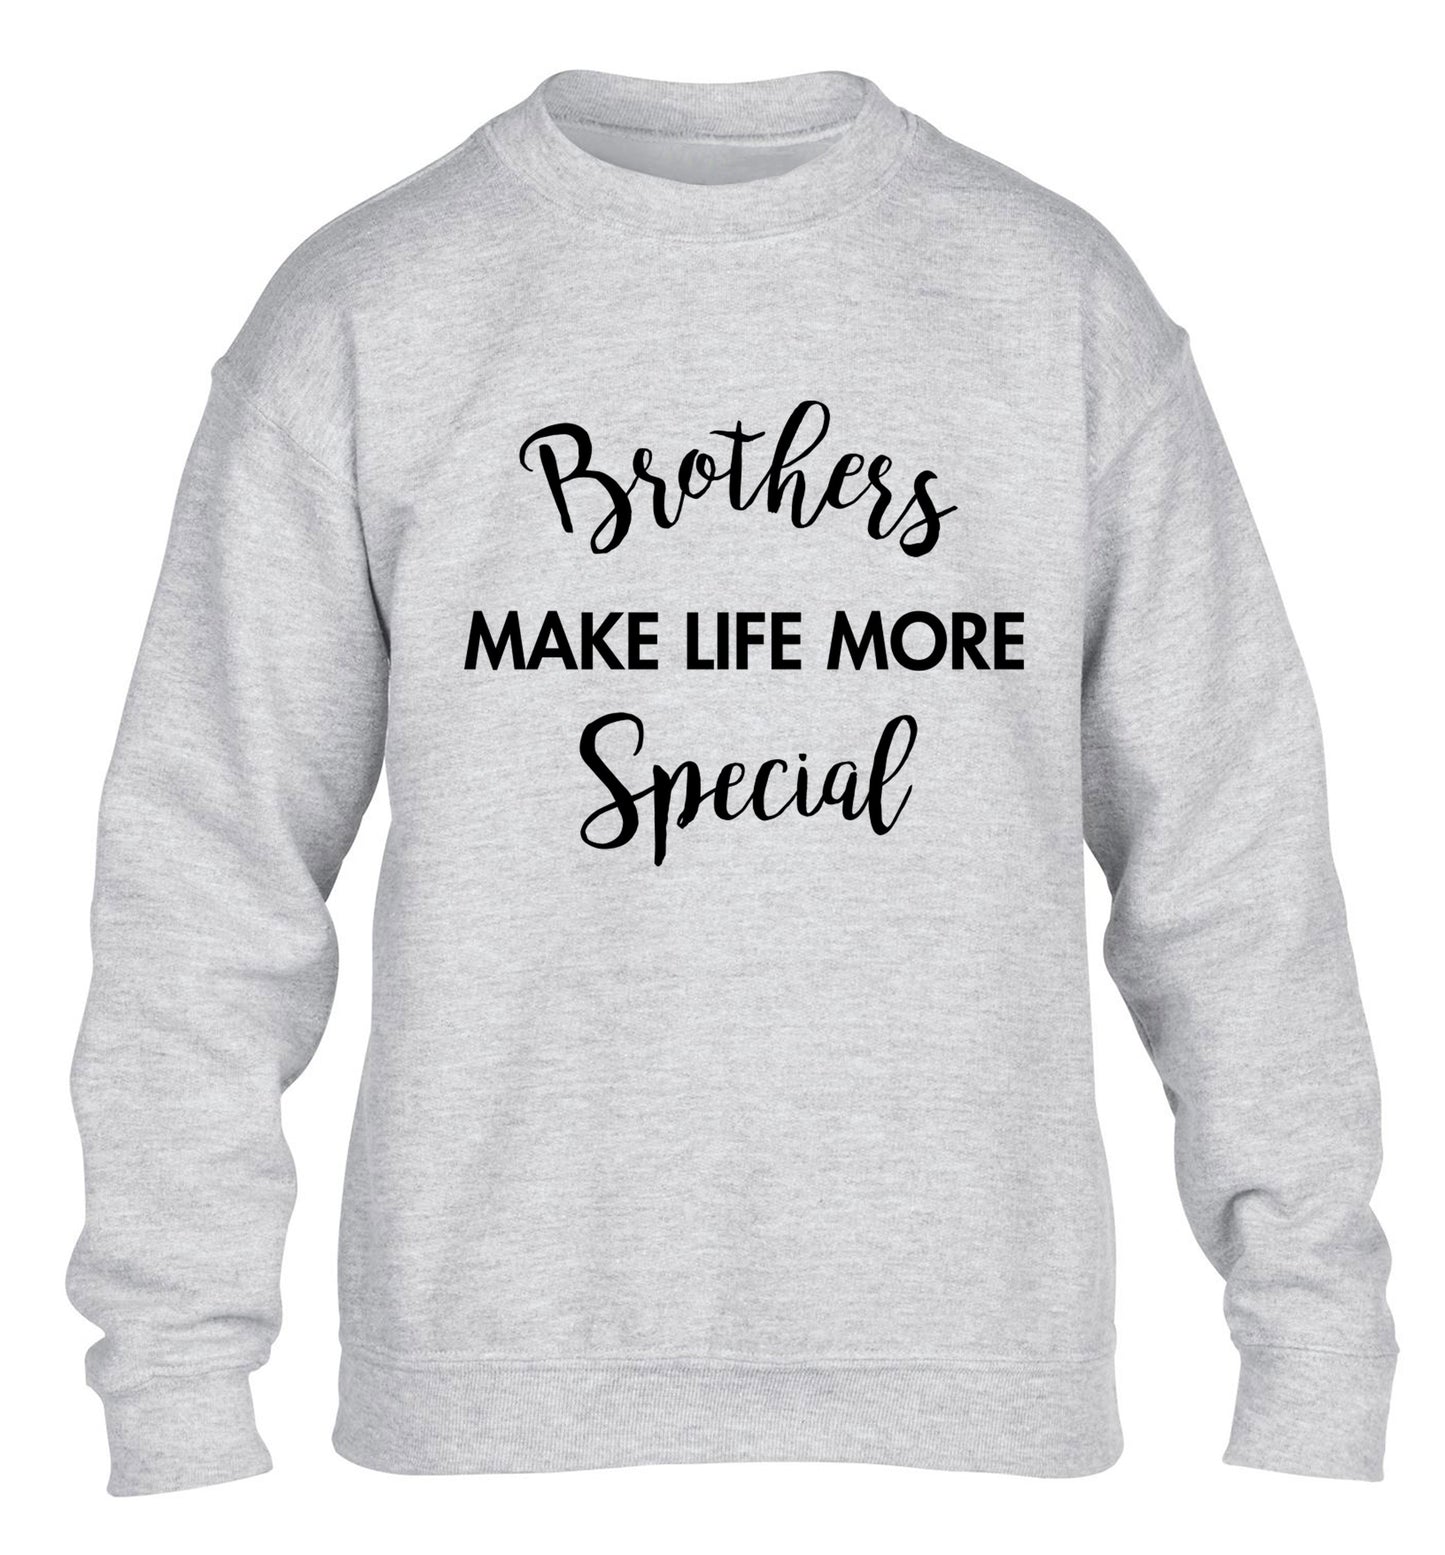 Brothers make life more special children's grey sweater 12-14 Years